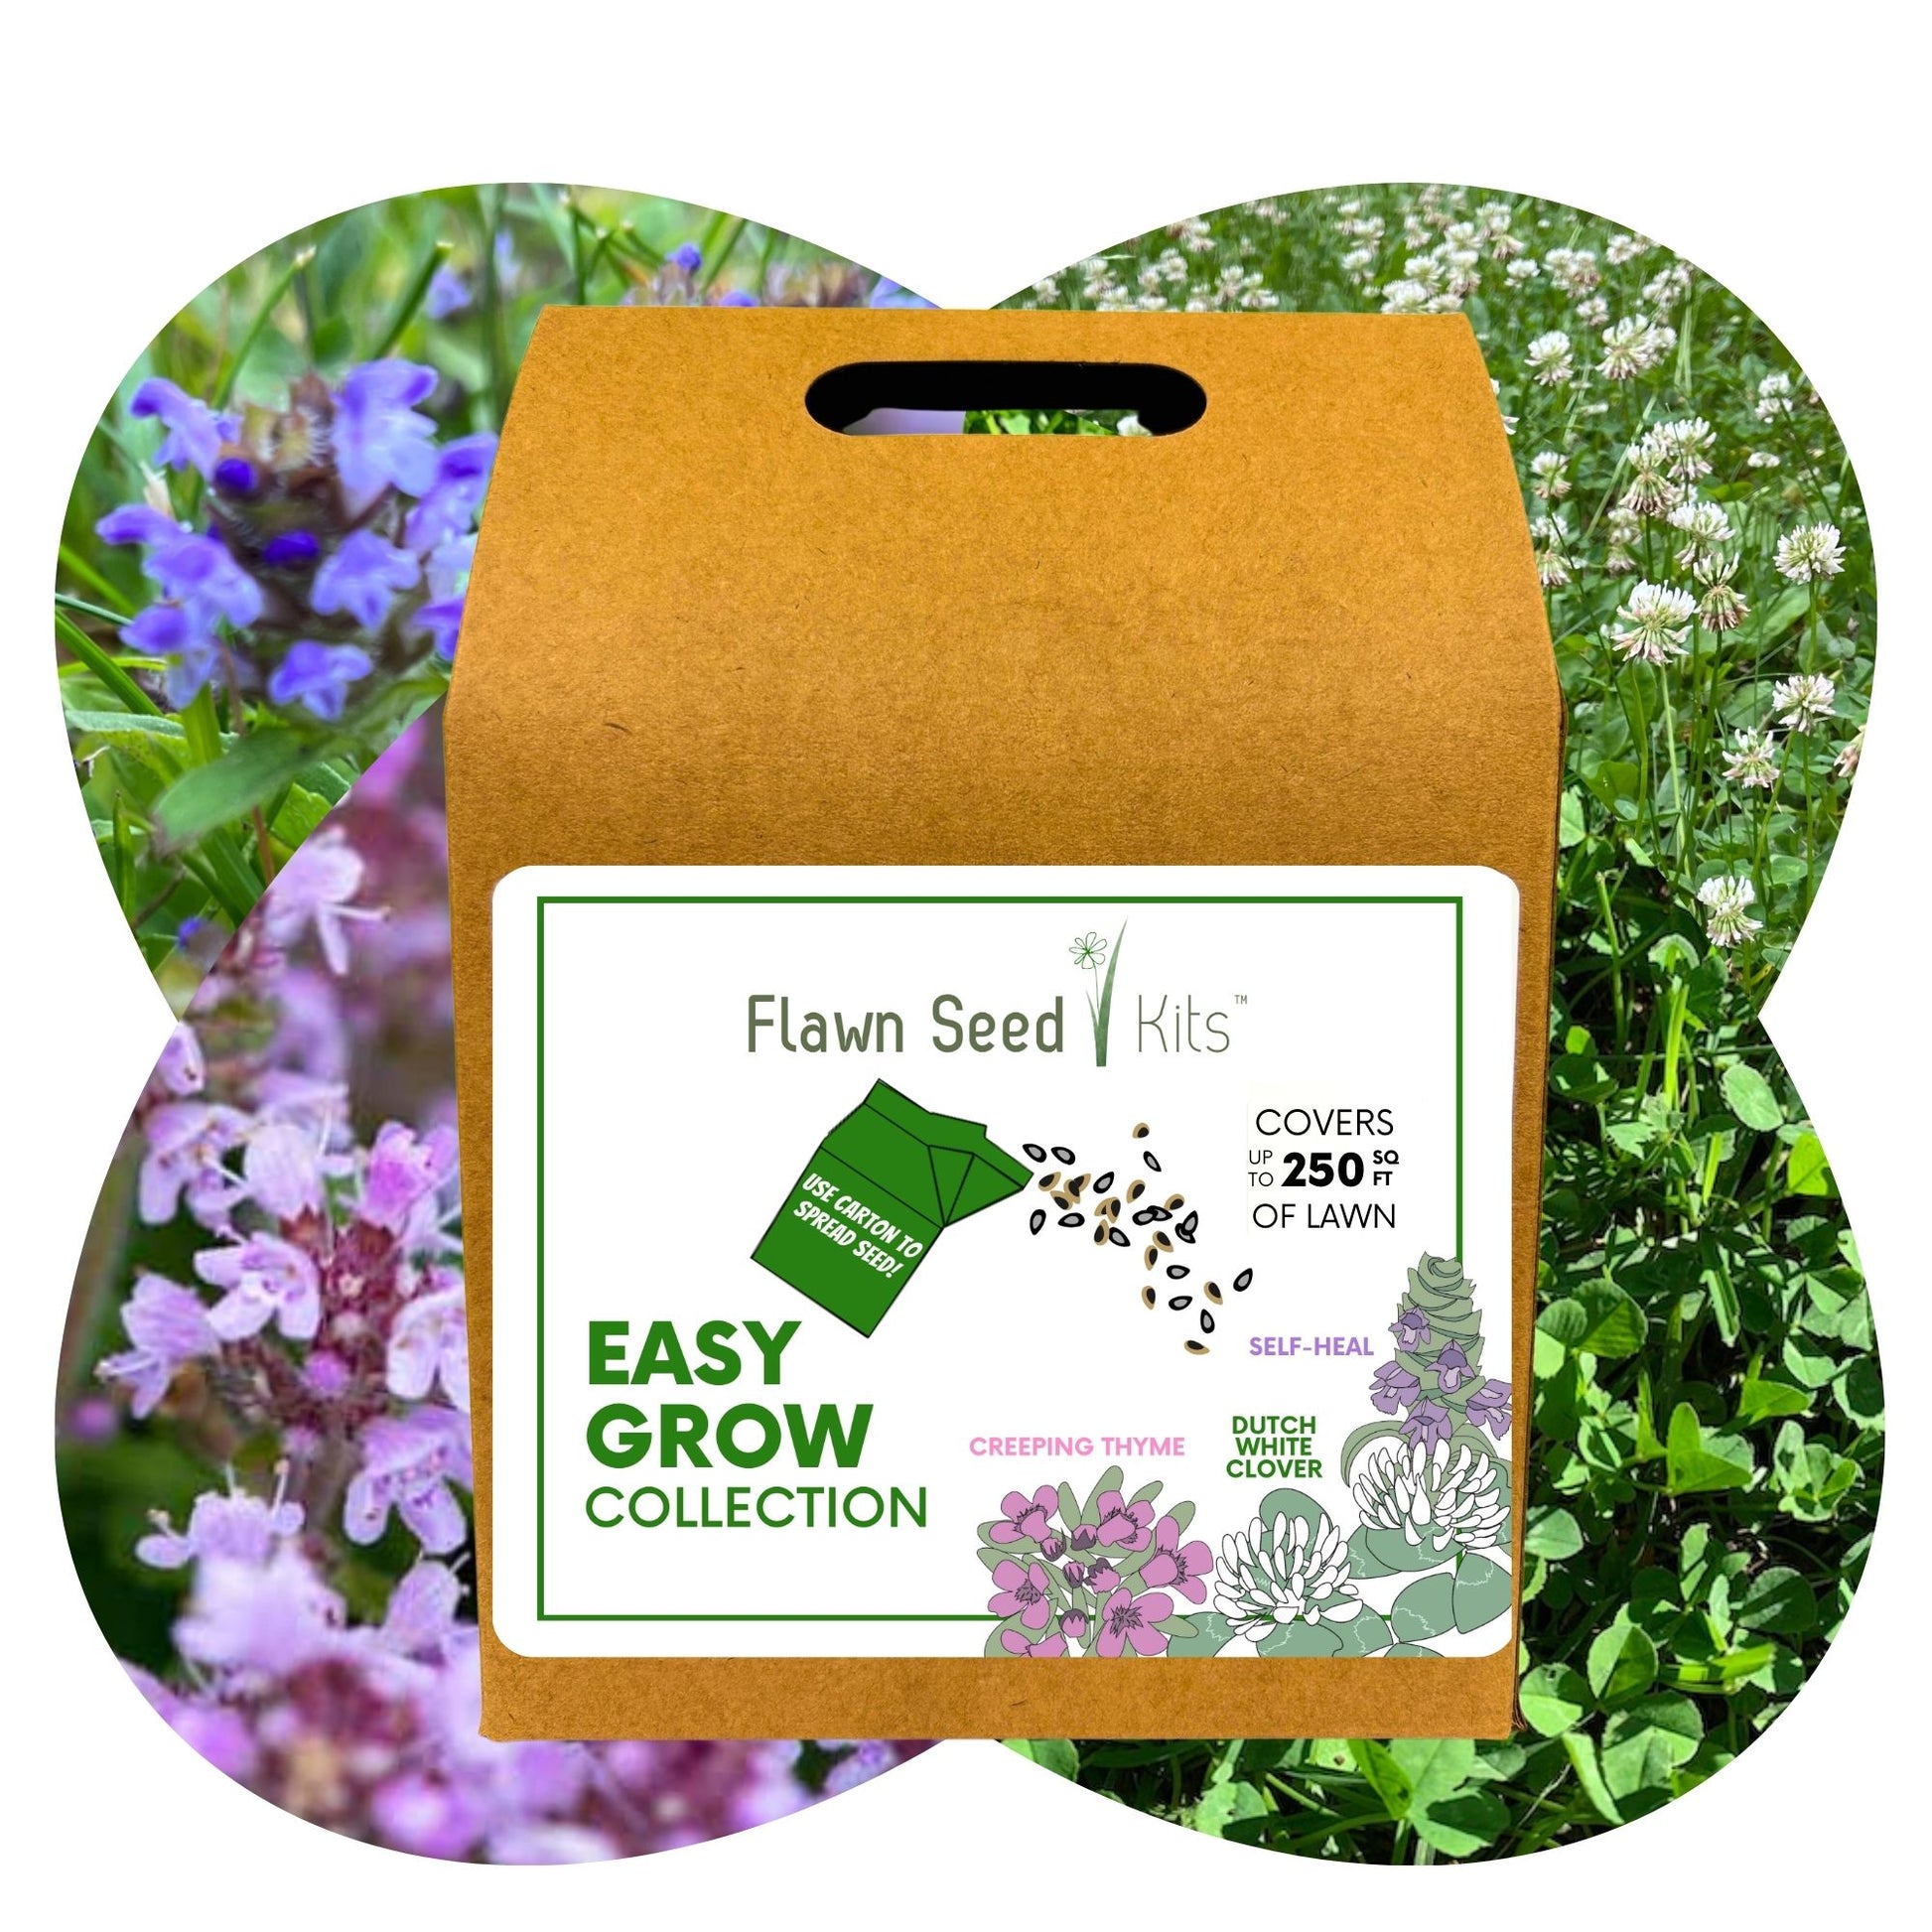 Bee Lawn Flowering Pollinator Seed Kit, Dutch White Clover Blooms, Self-Heal Blooms, Creeping Thyme Blooms, Easy Spread Eco-Friendly Container